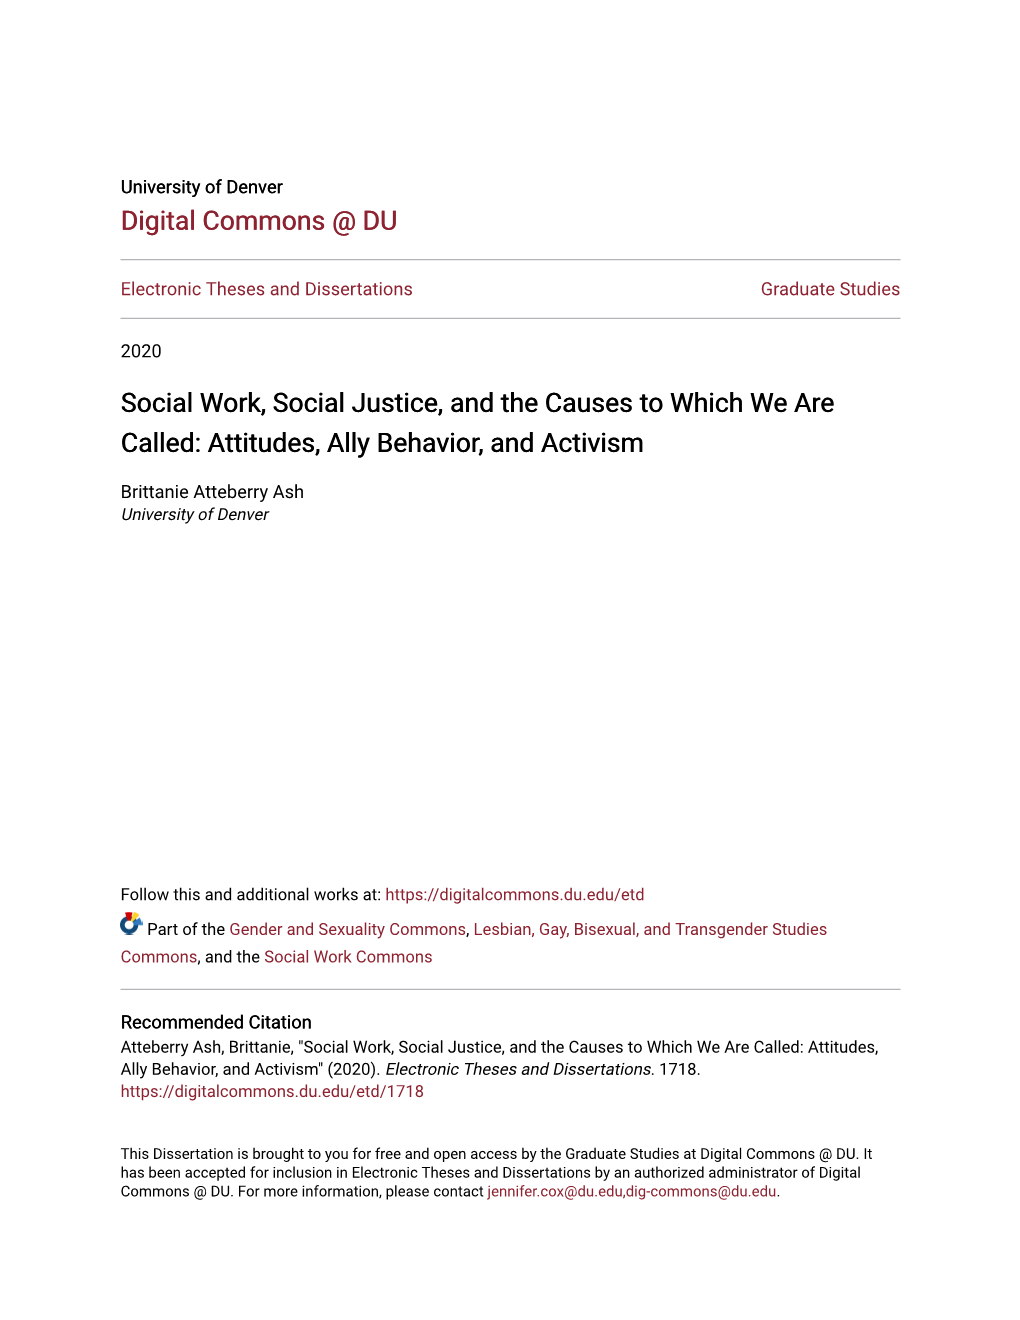 Social Work, Social Justice, and the Causes to Which We Are Called: Attitudes, Ally Behavior, and Activism